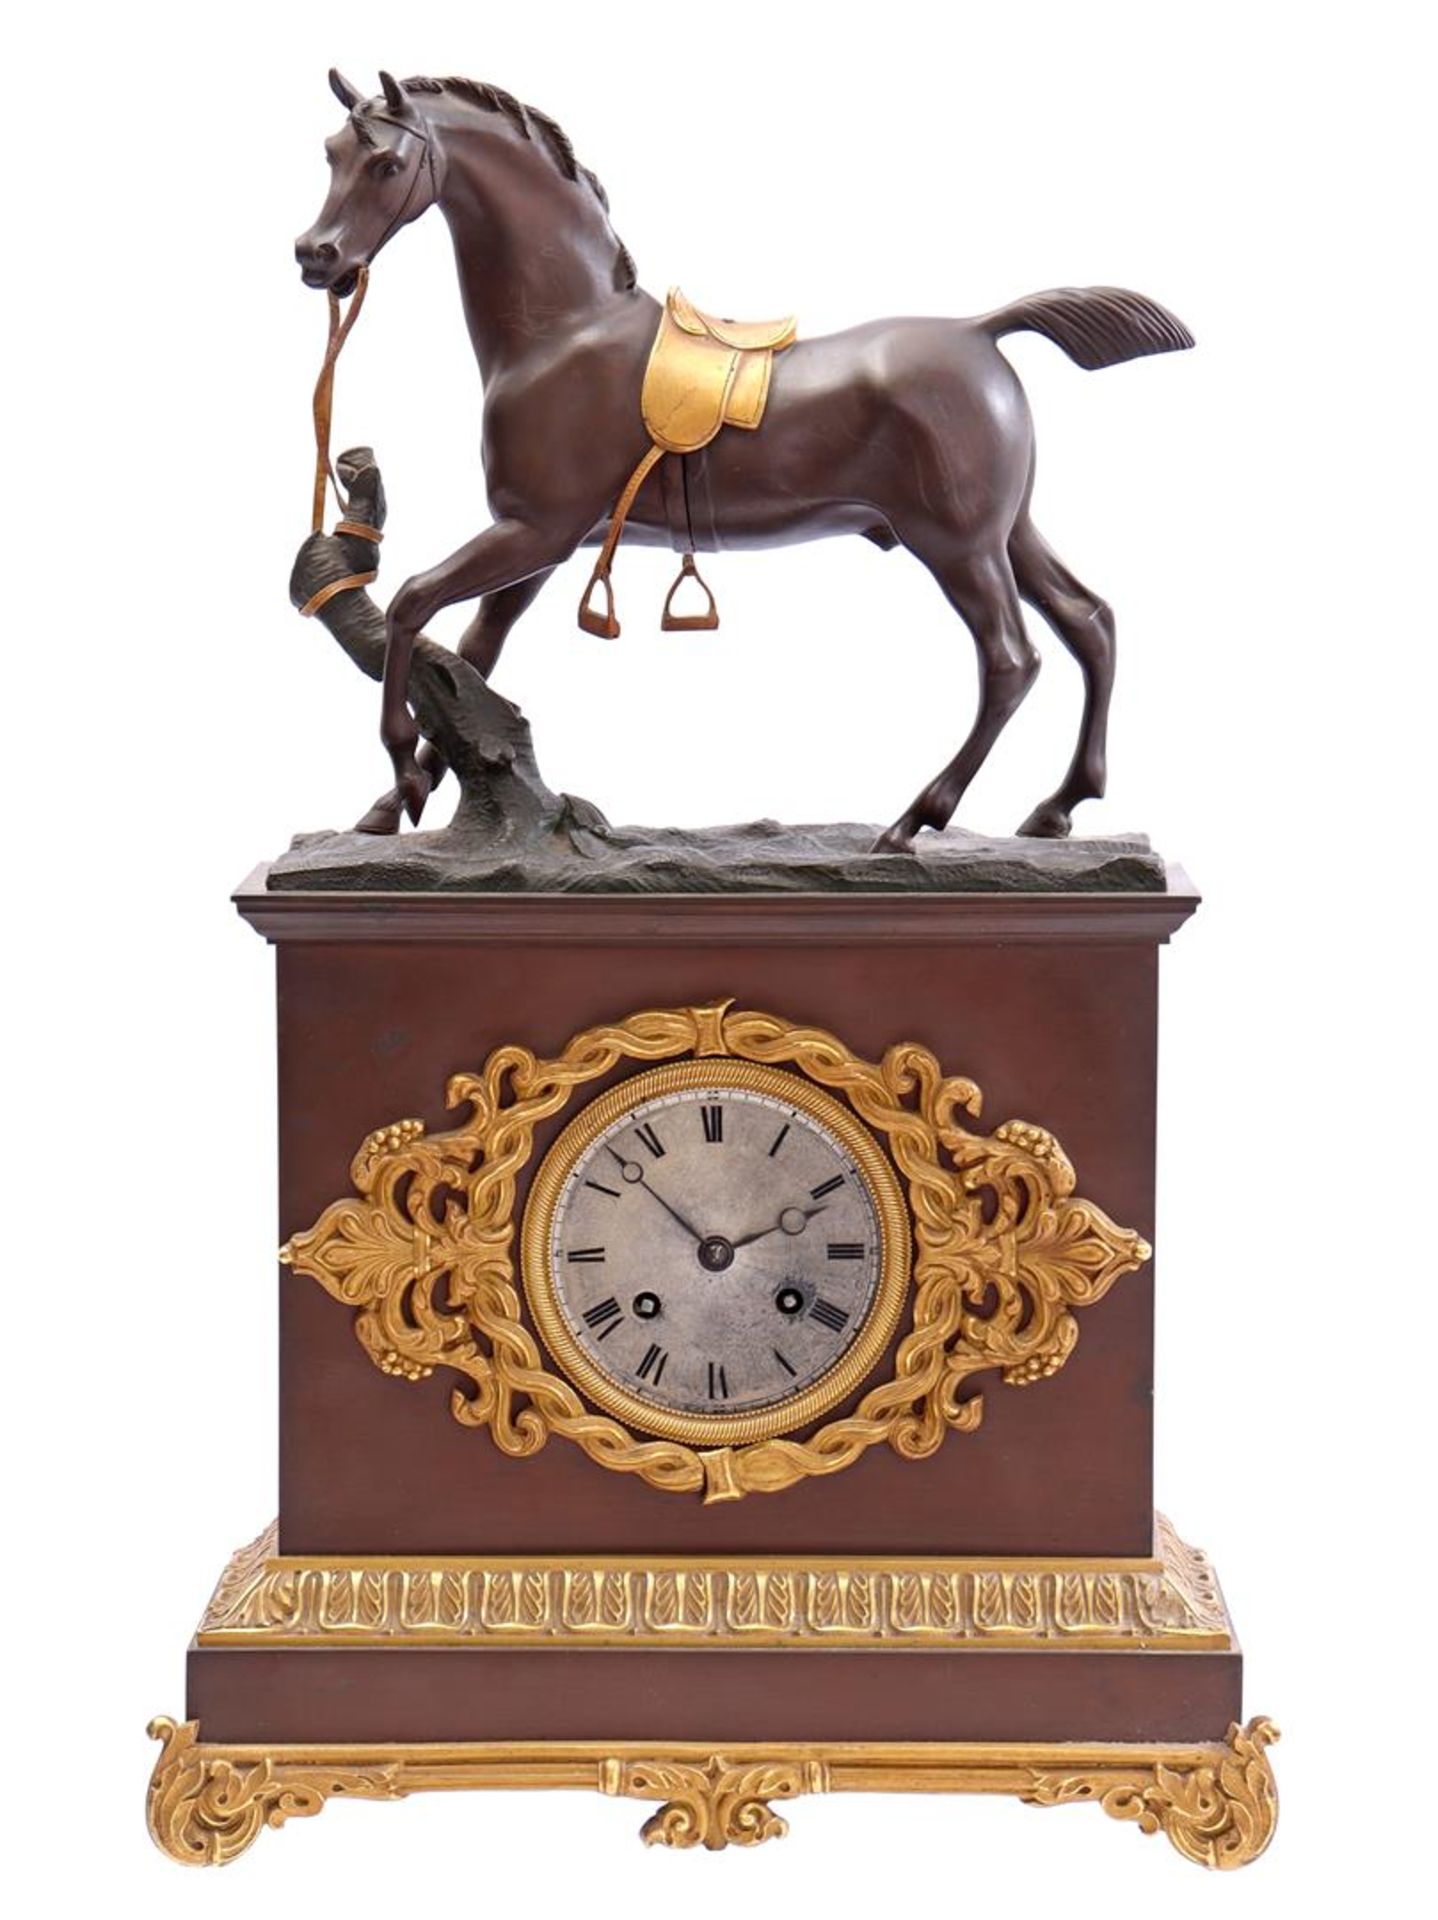 Brass mantel clock with bronze statue of a horse on top